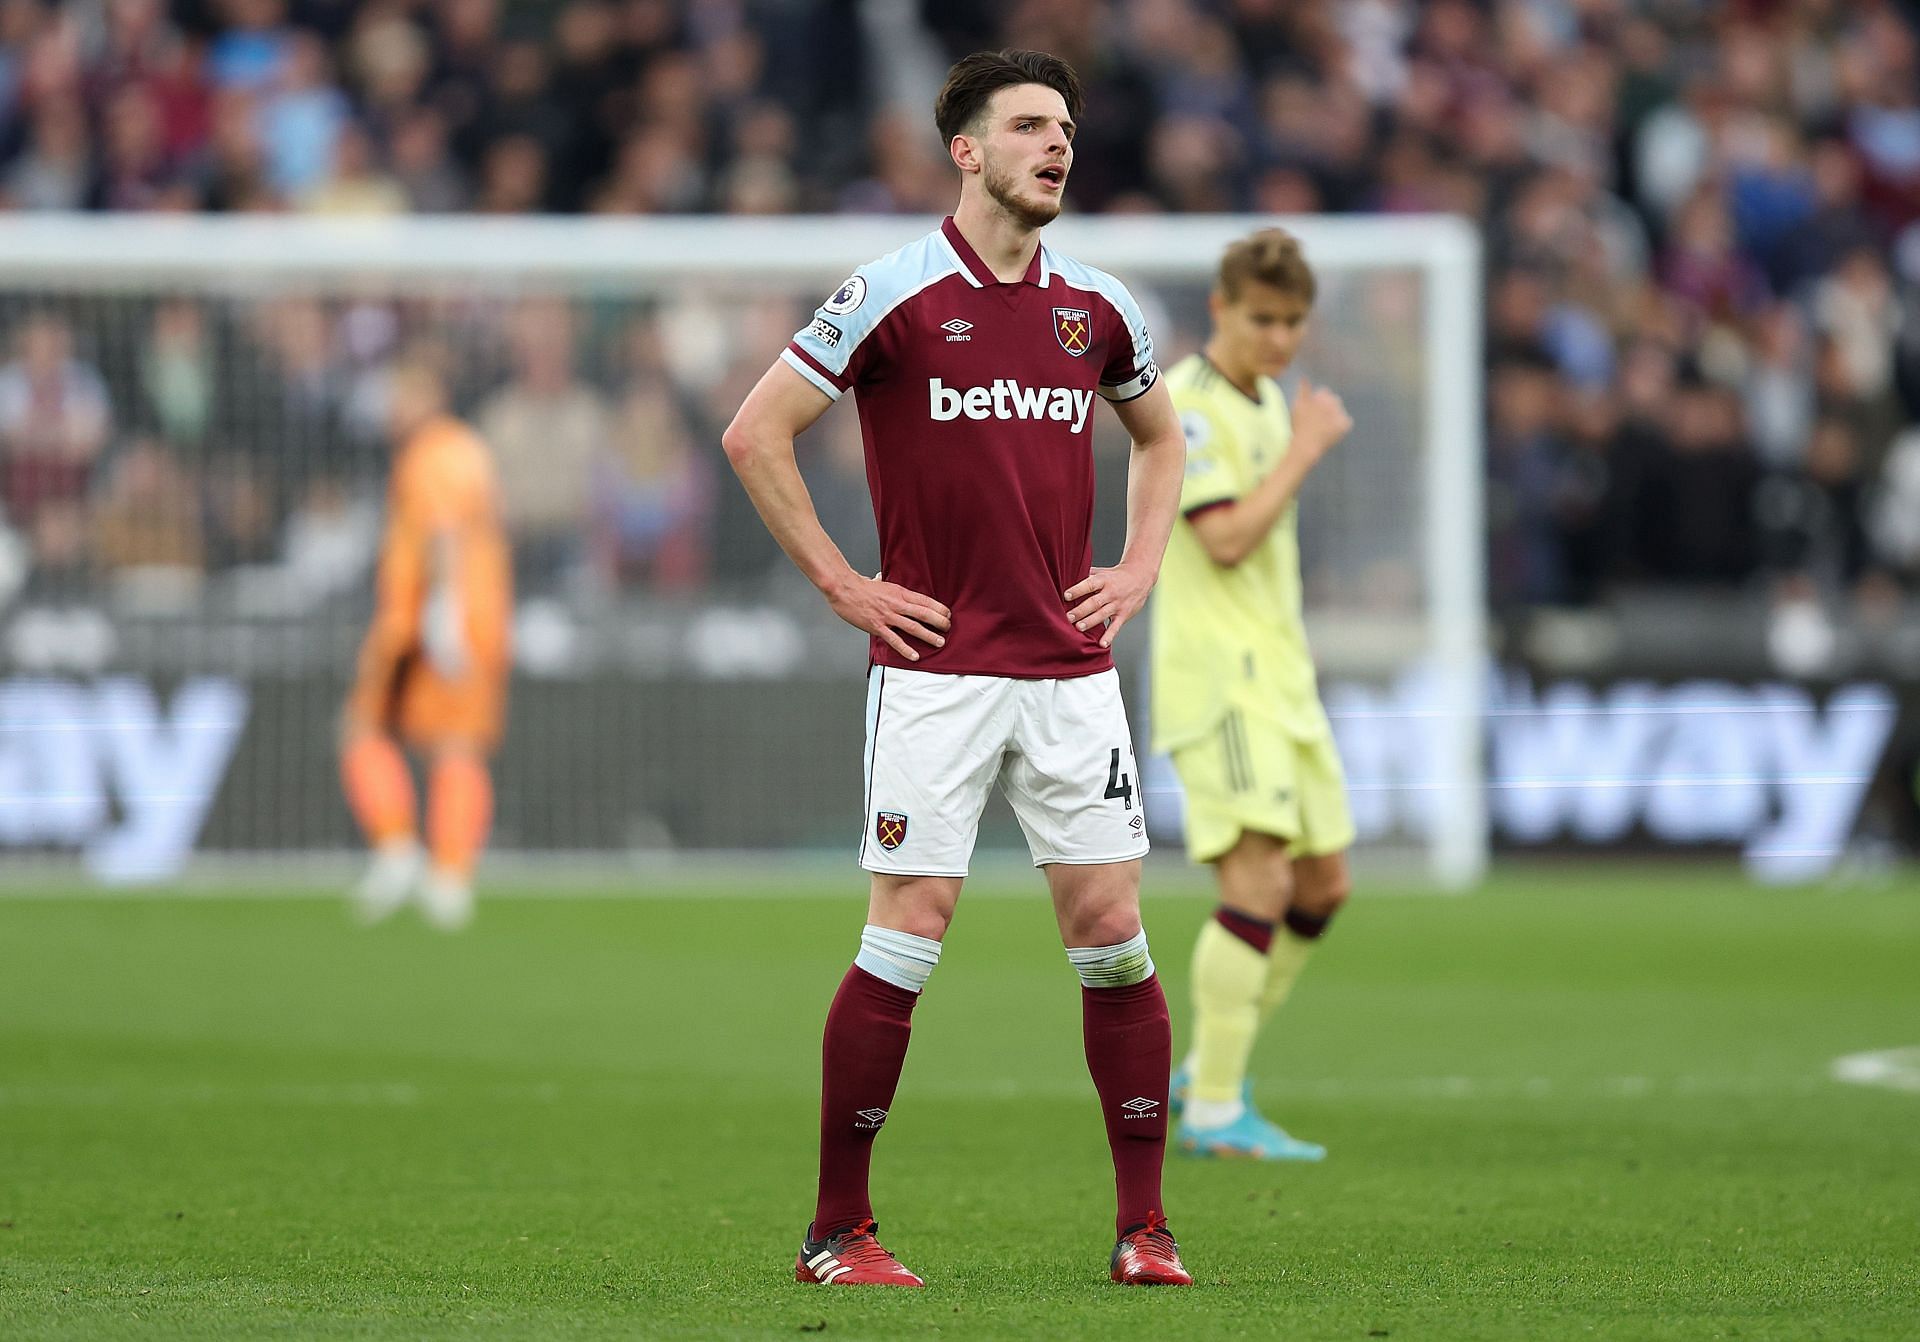 Declan Rice is unlikely to leave West Ham United this summer.